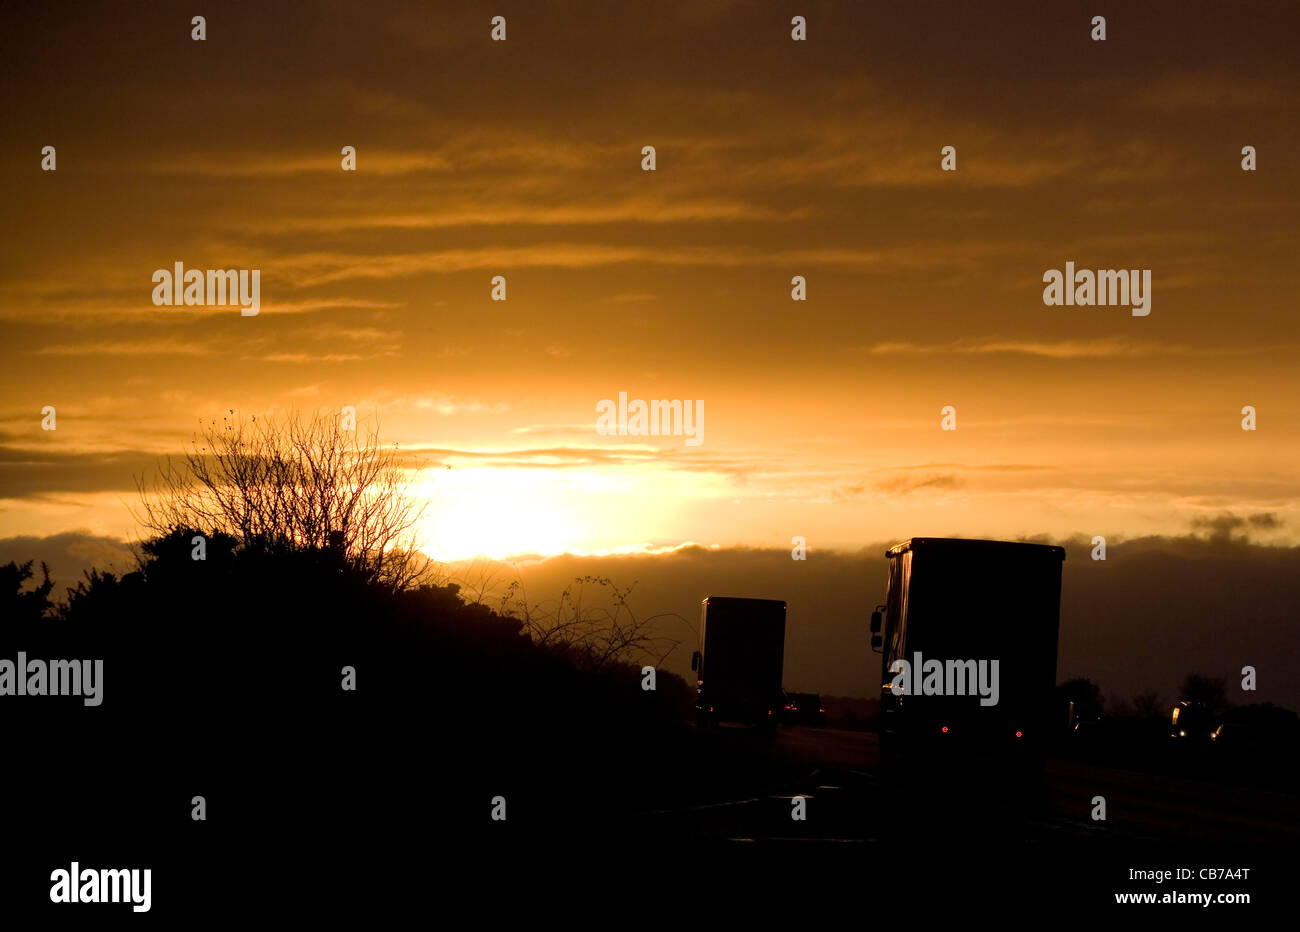 Lorries on a road at sunset in uk Stock Photo